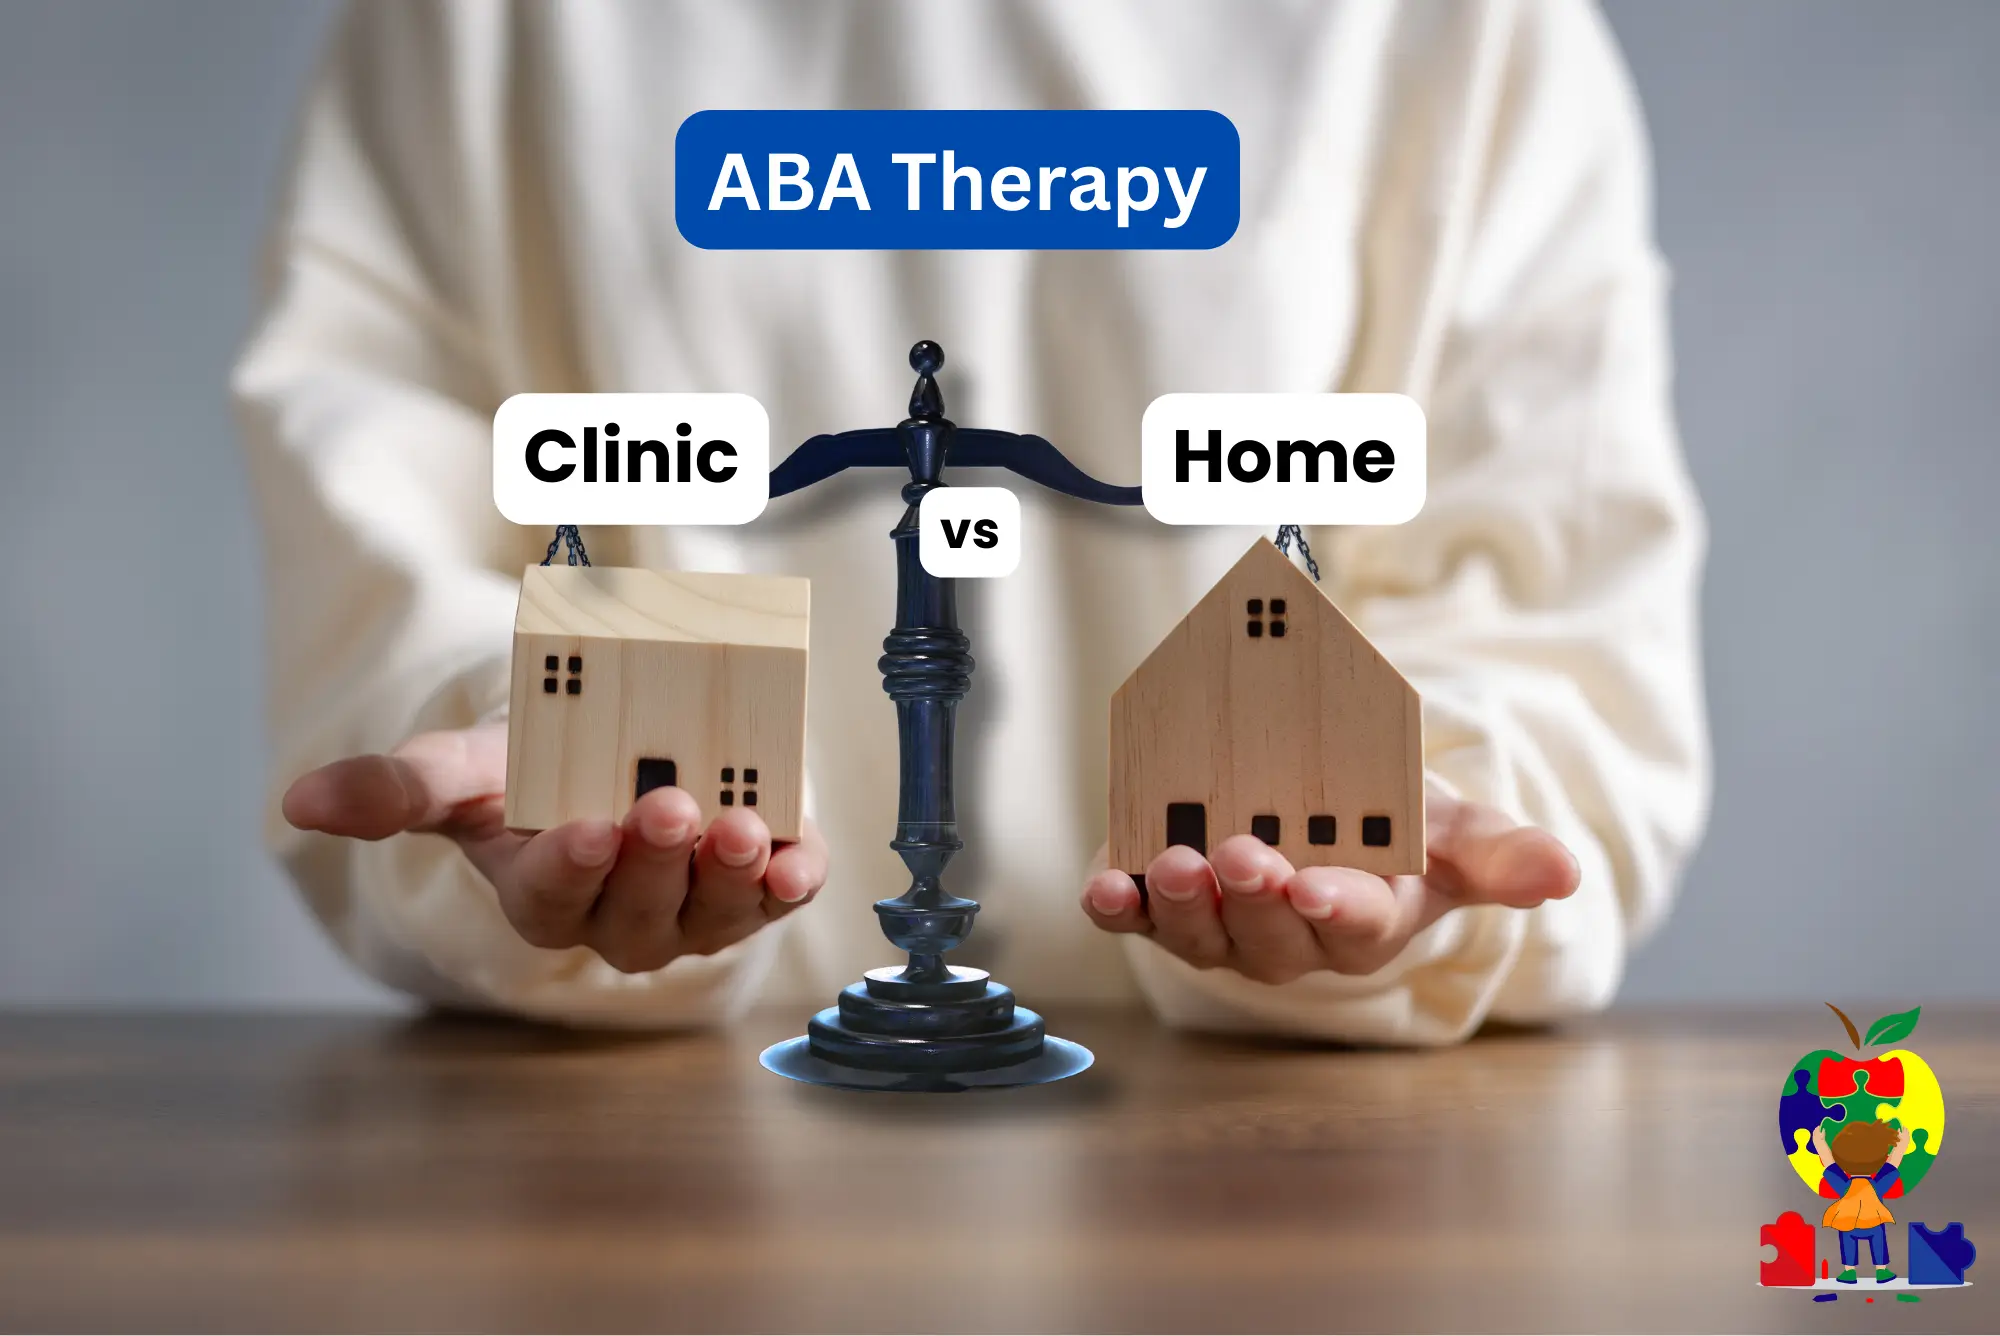 Clinic vs Home-based ABA Therapy